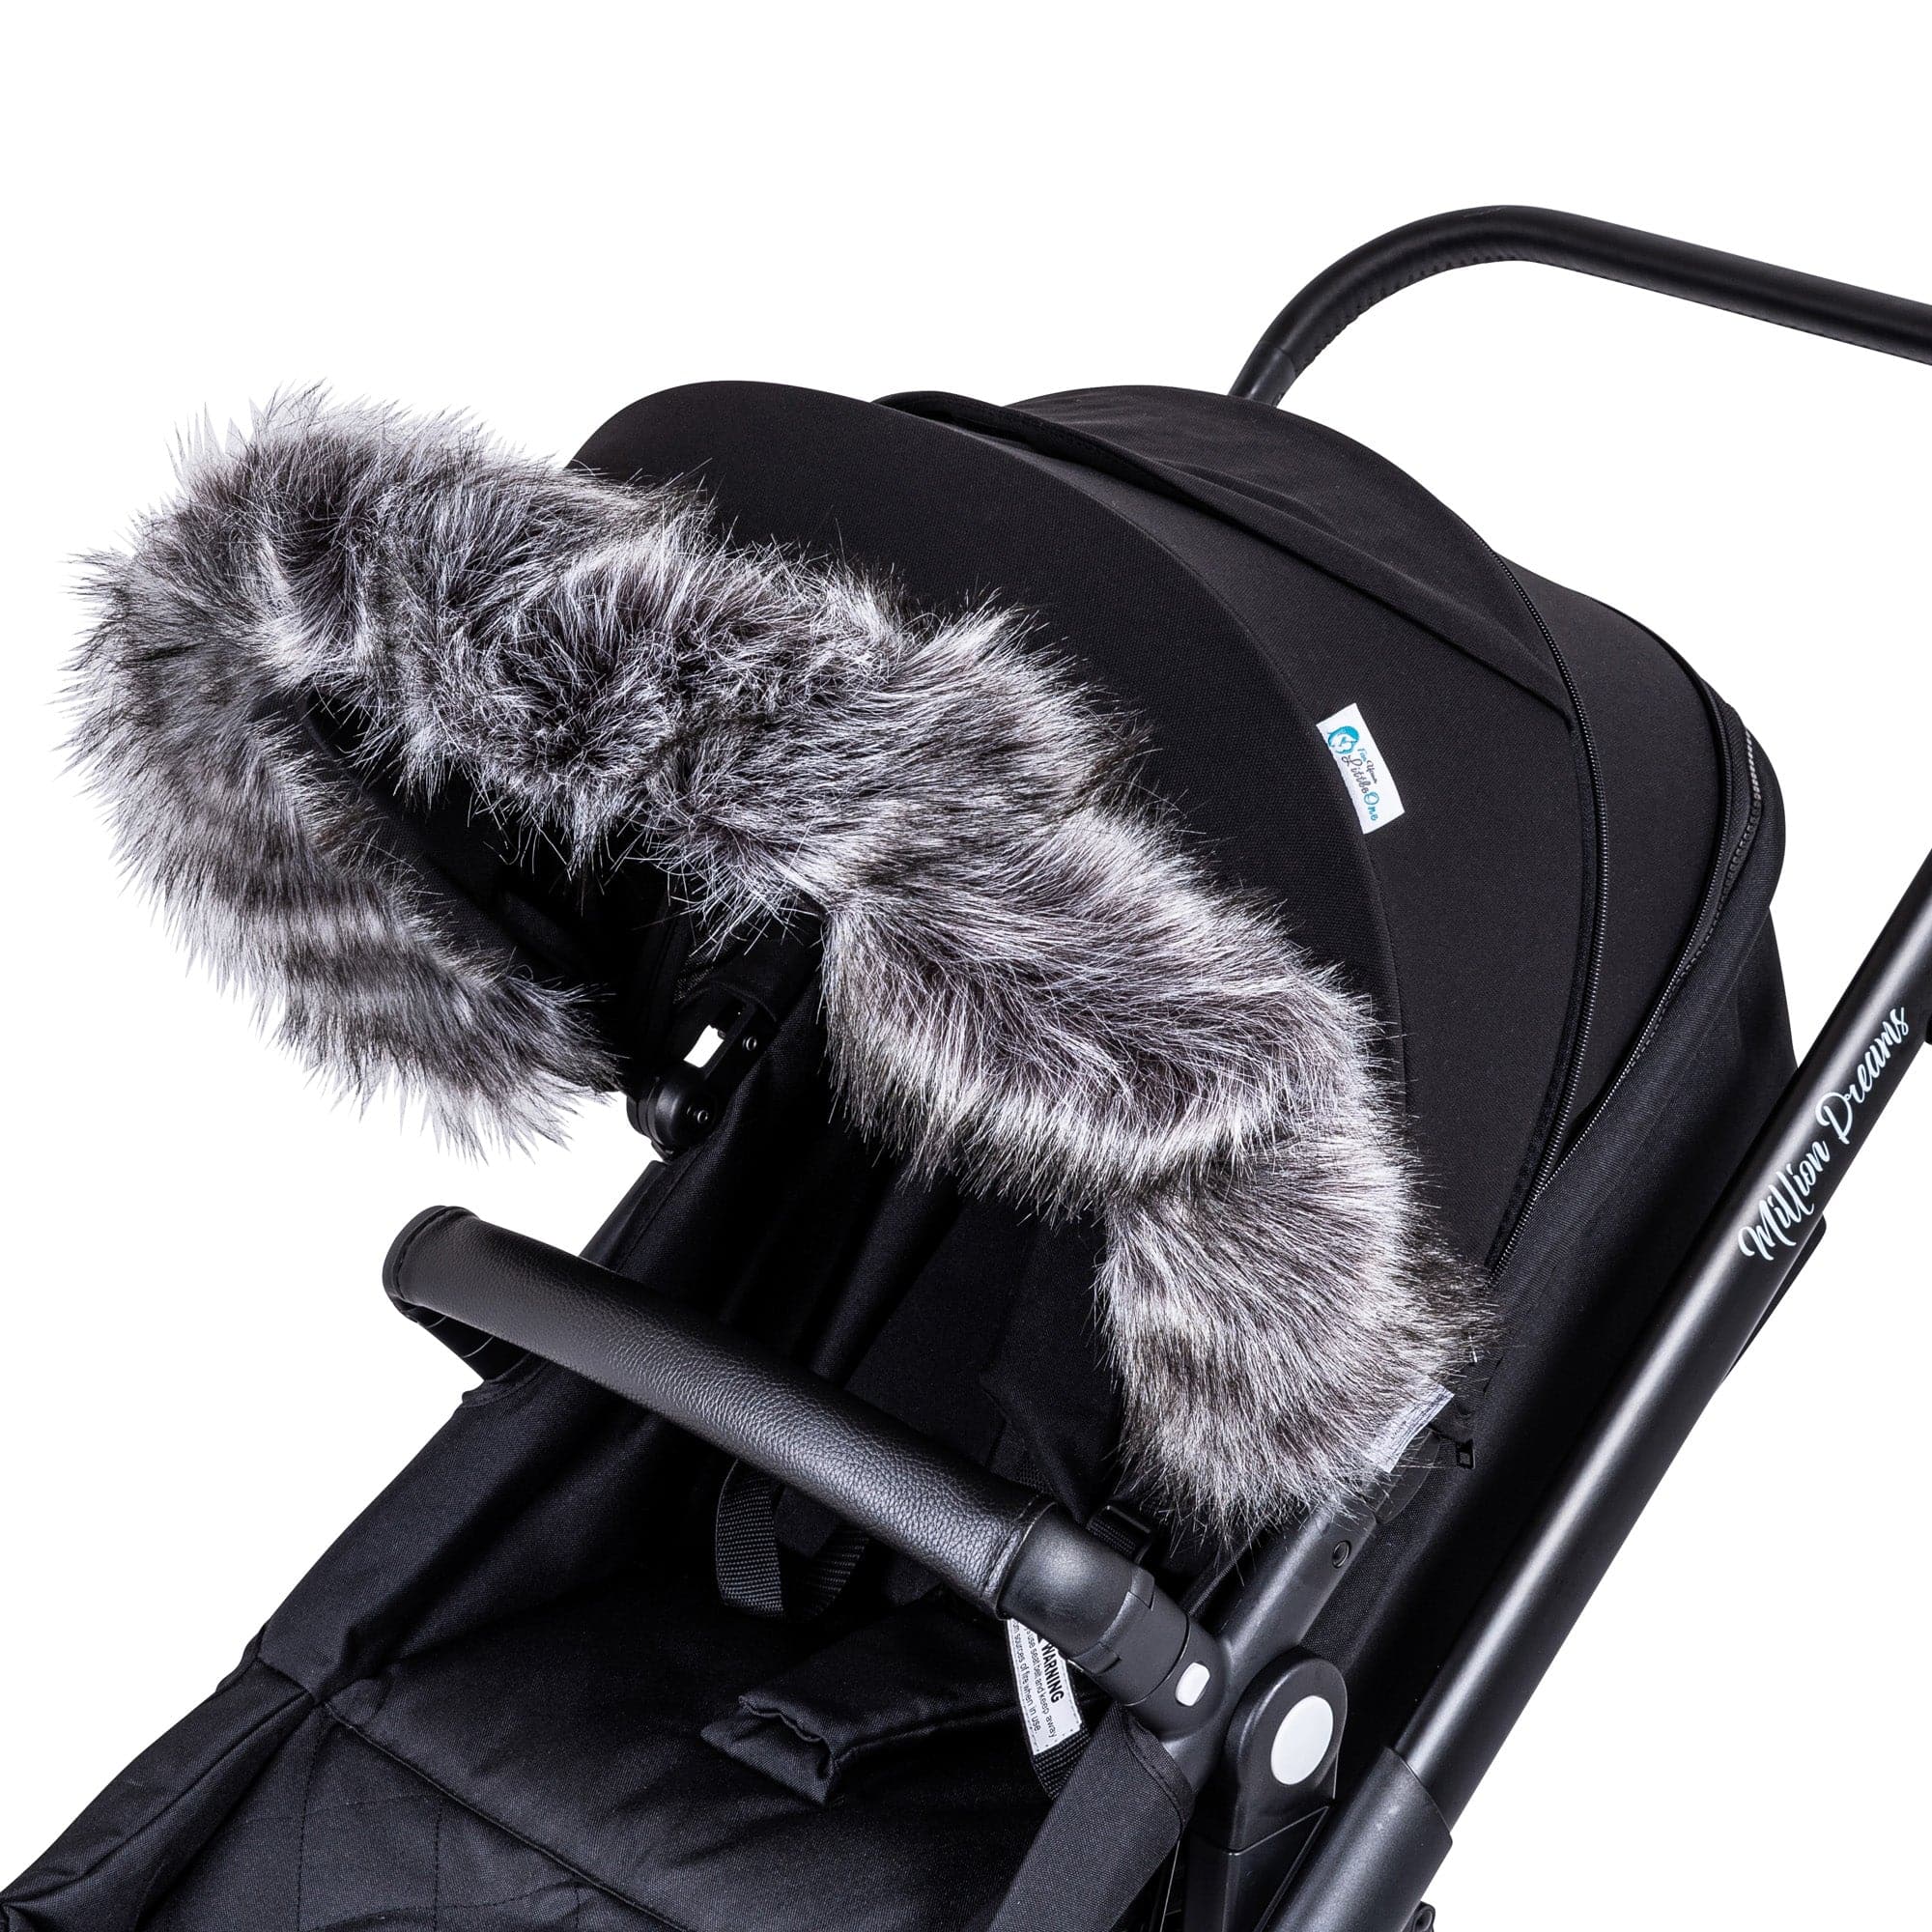 Pram Fur Hood Trim Attachment For Pushchair Compatible with Diono - For Your Little One